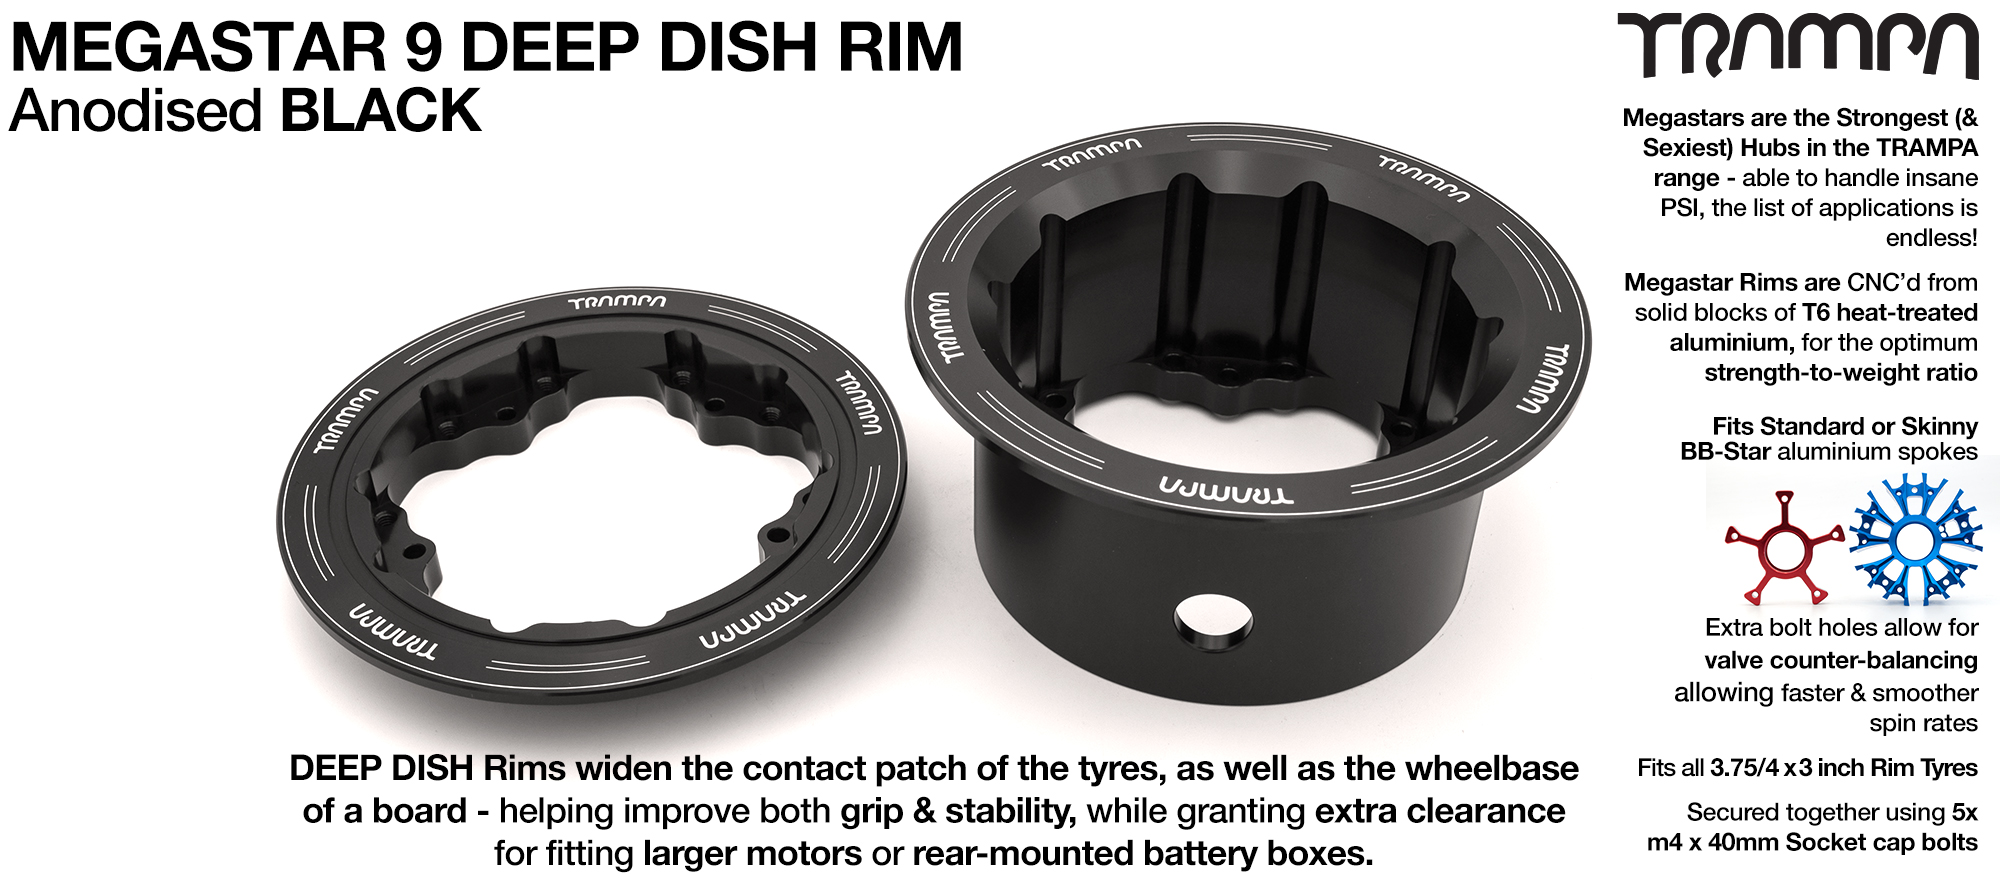 MEGASTAR 9 DEEP-DISH Rims Measure 3.75/4x 3 Inch. The Bearings are positioned OFF-SET & accept 4 Inch Rim Tyres to make 9 or 10 inch Wheels - BLACK